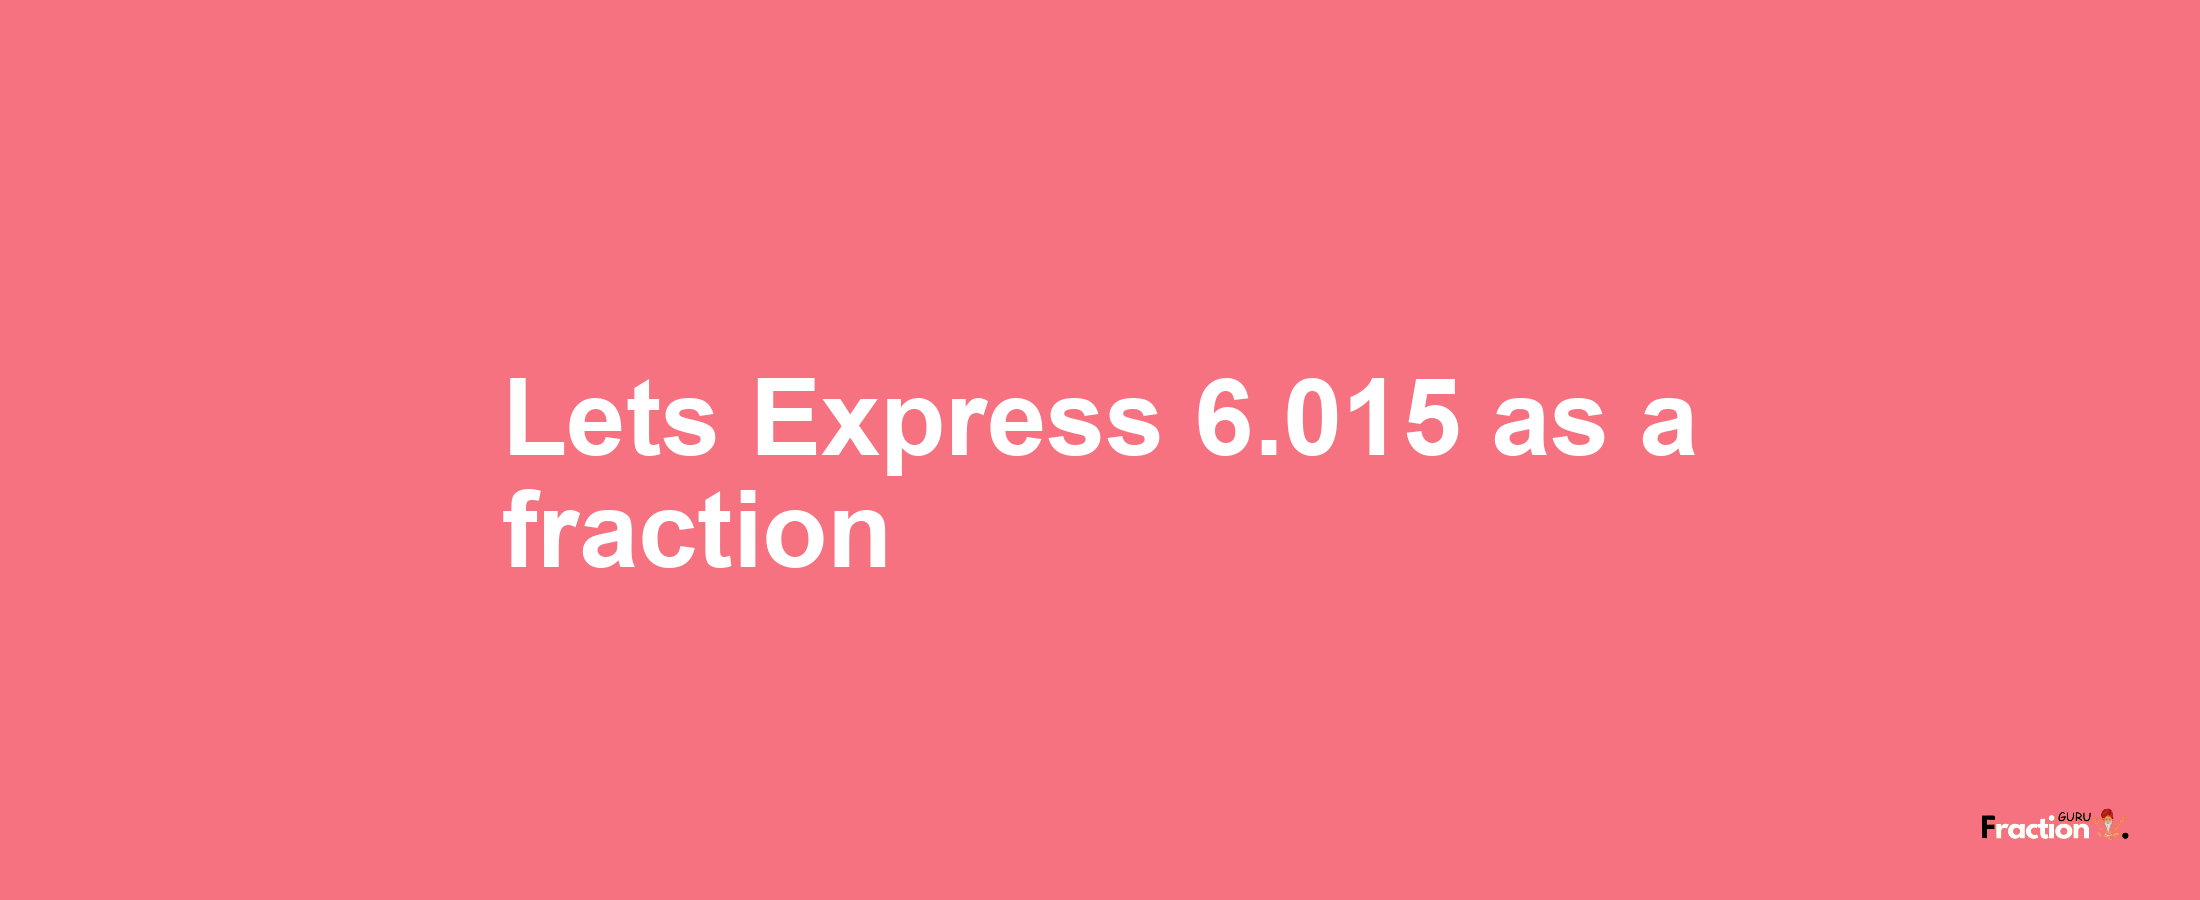 Lets Express 6.015 as afraction